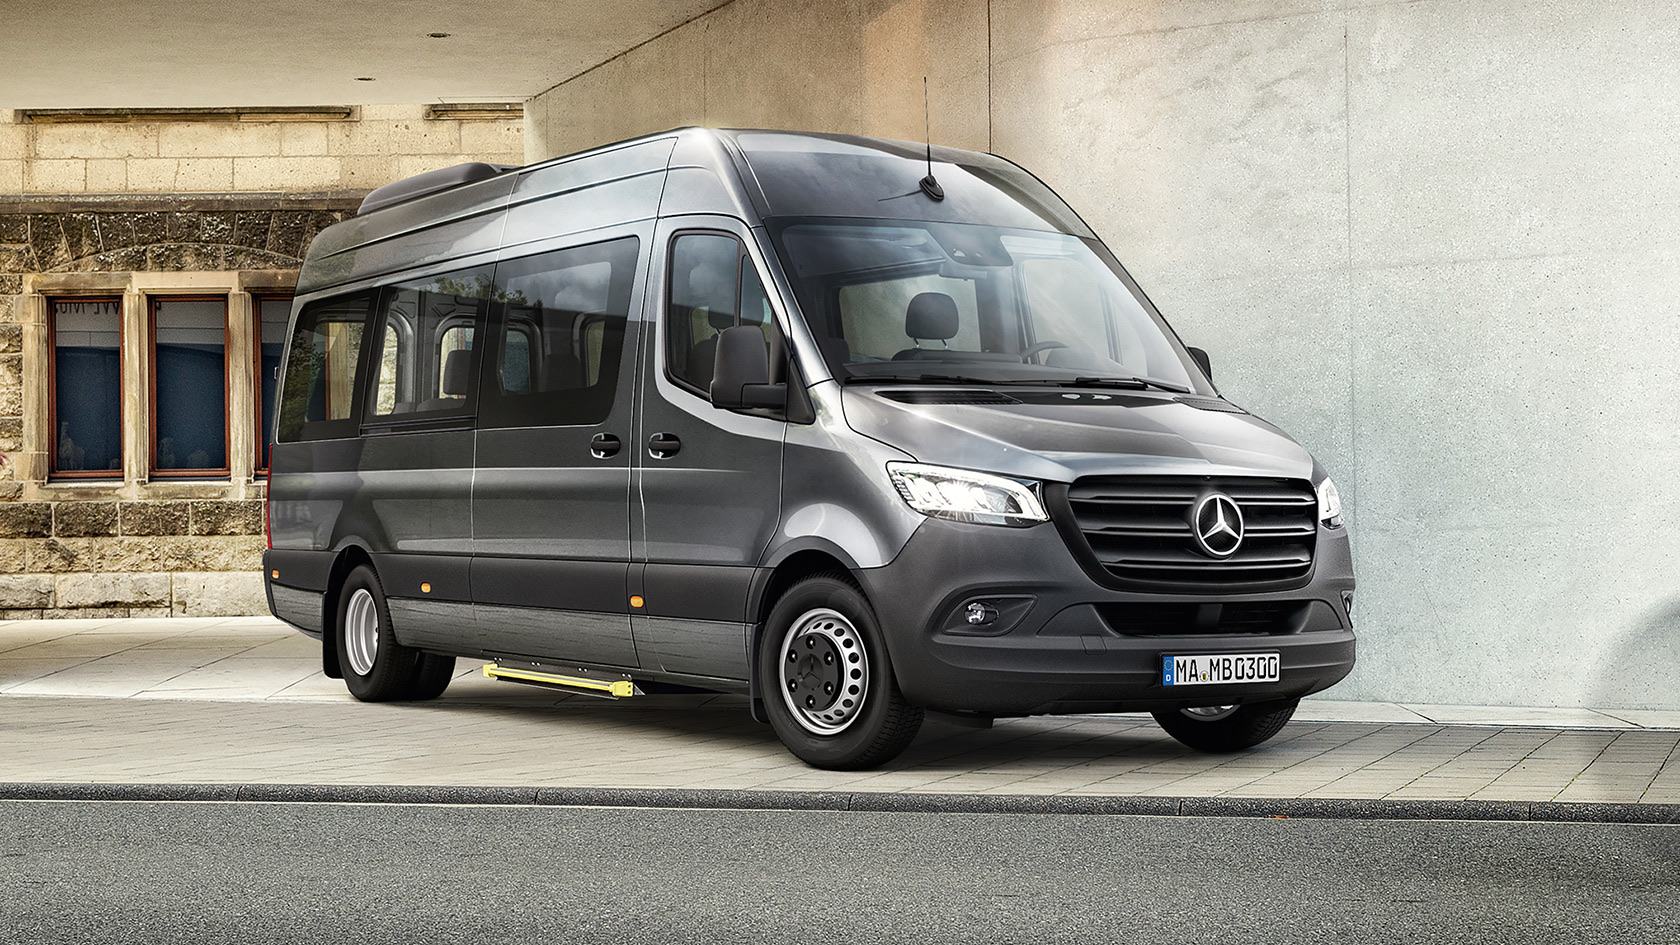 12-Seater Minibus Hire: Optimal for Small Business Outings and Group Excursions